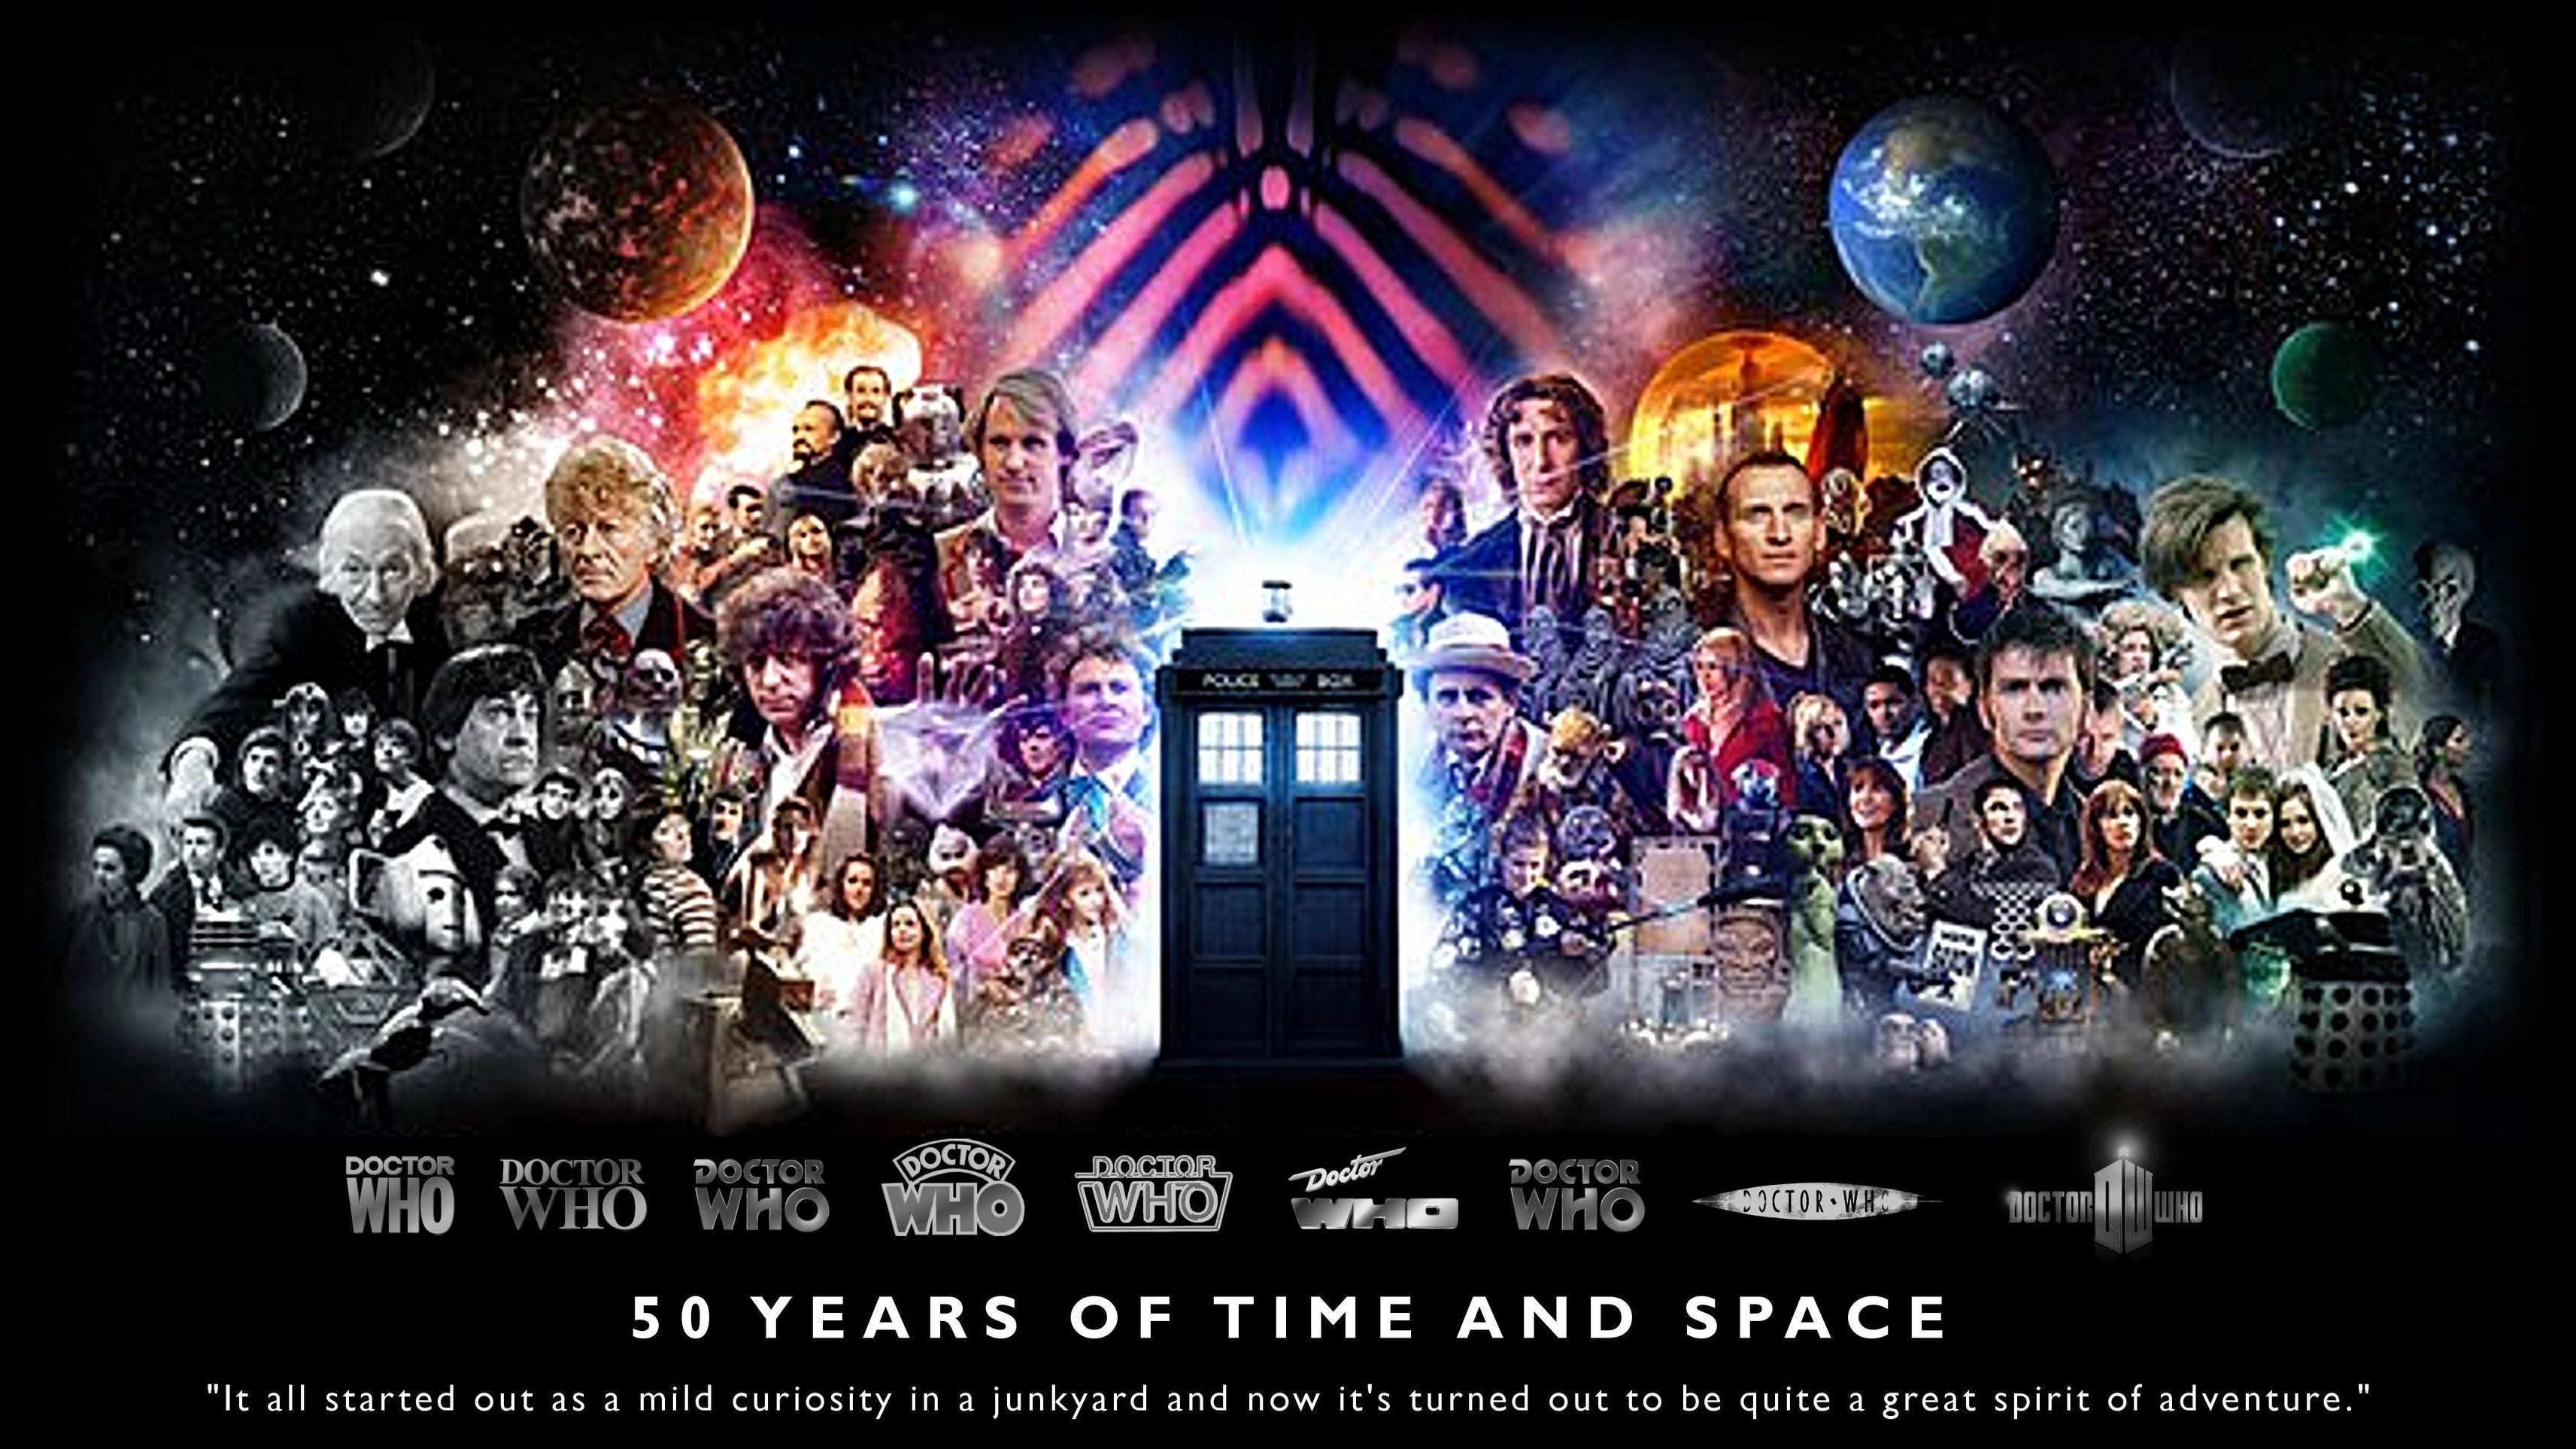 3425x1926 Here's a Doctor Who 50th Anniversary HQ Wallpaper that I made! - Imgur